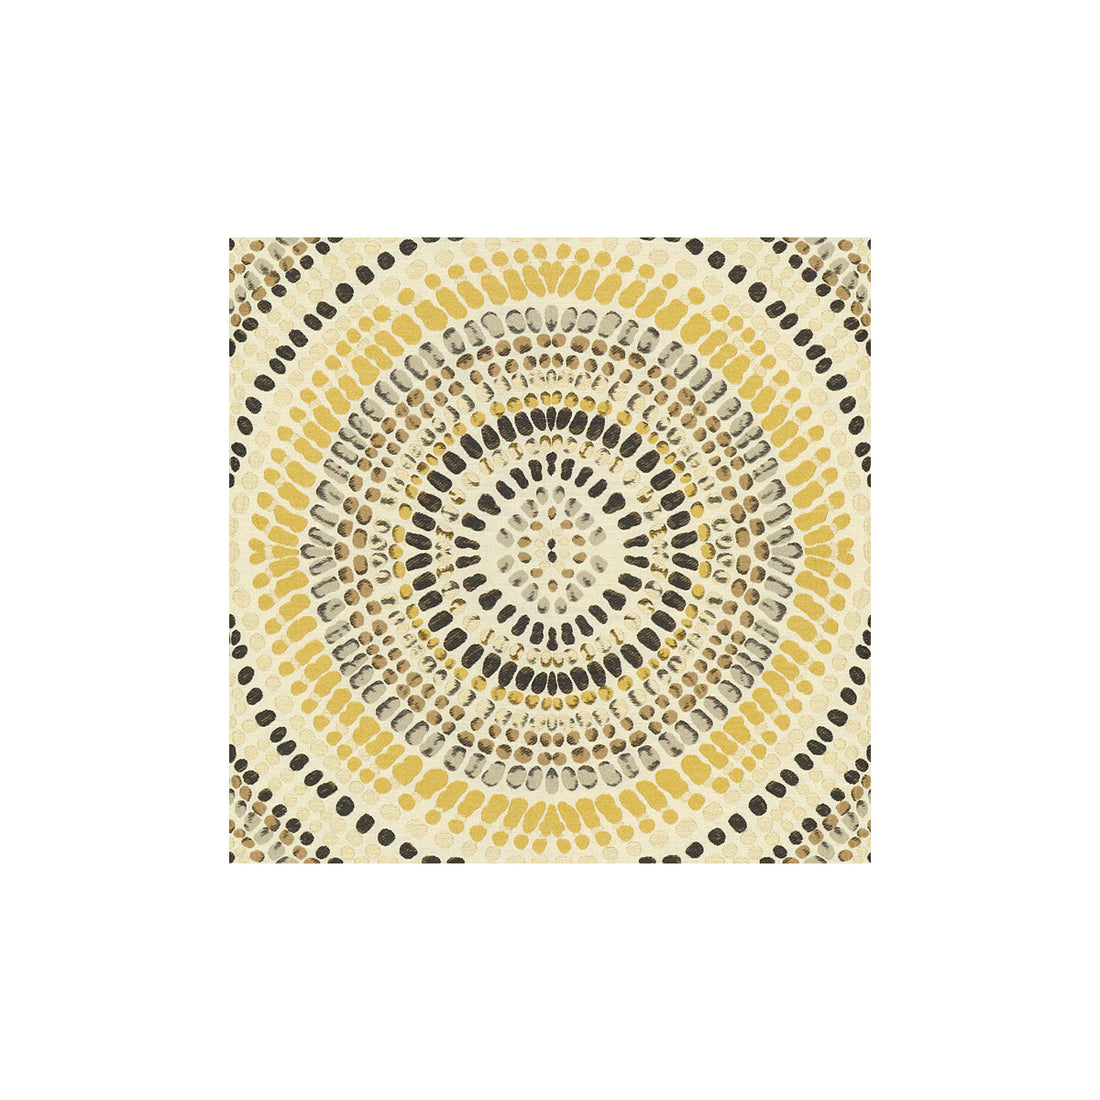 Painted Mosaic fabric in golden grey color - pattern 32987.411.0 - by Kravet Couture in the Modern Colors III collection